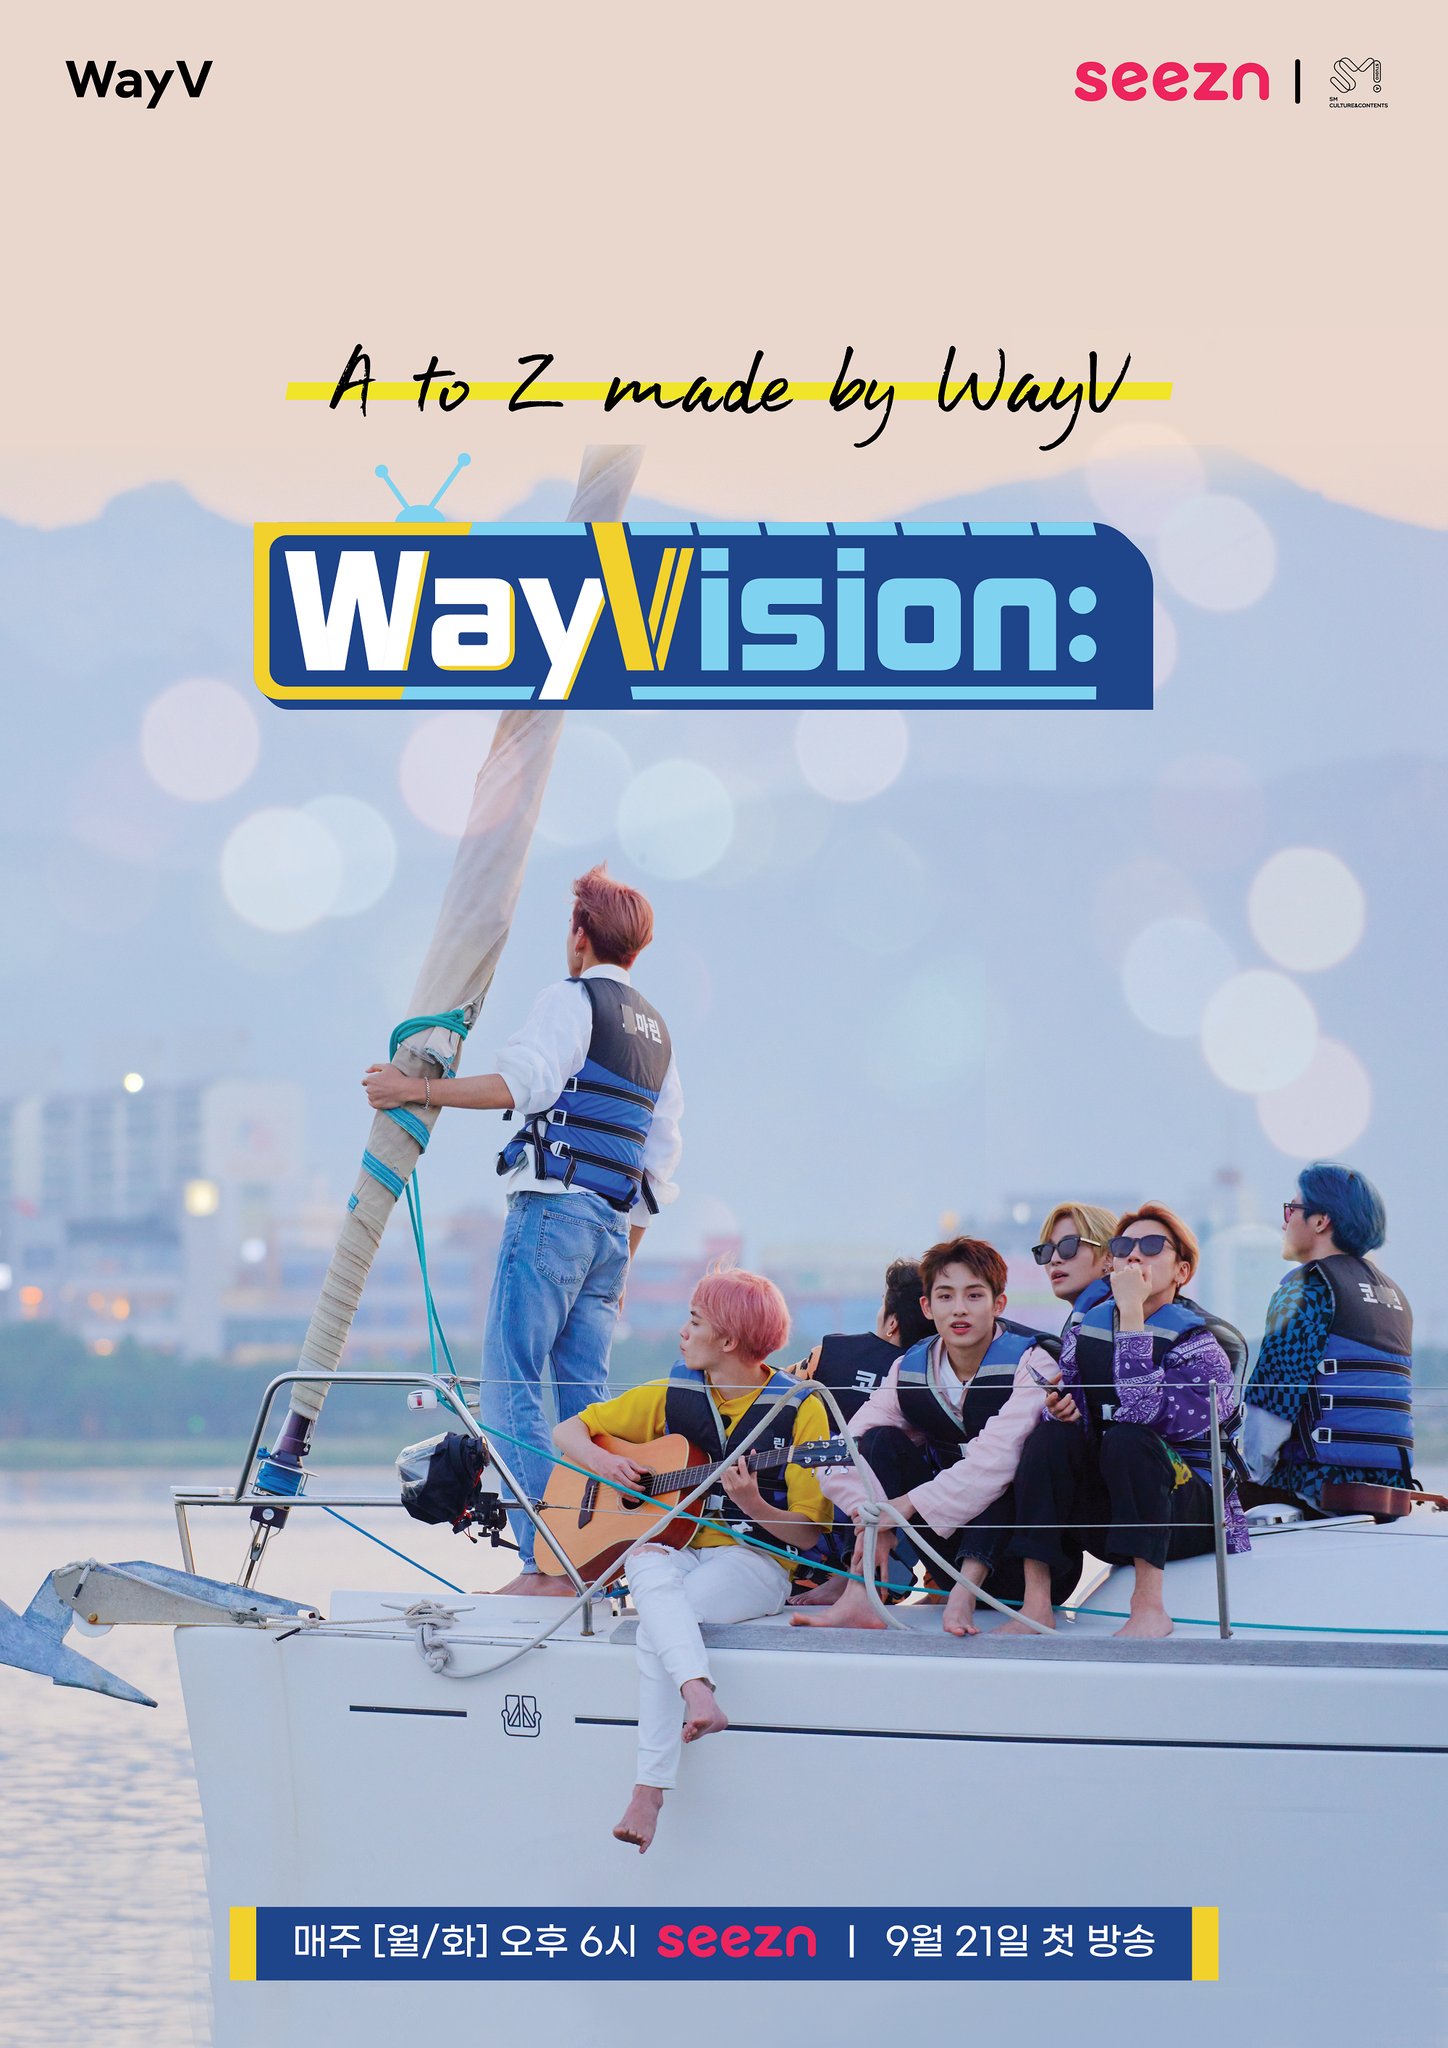 wayv-to-unveil-their-own-first-reality-show-wayvision-on-september-21-2